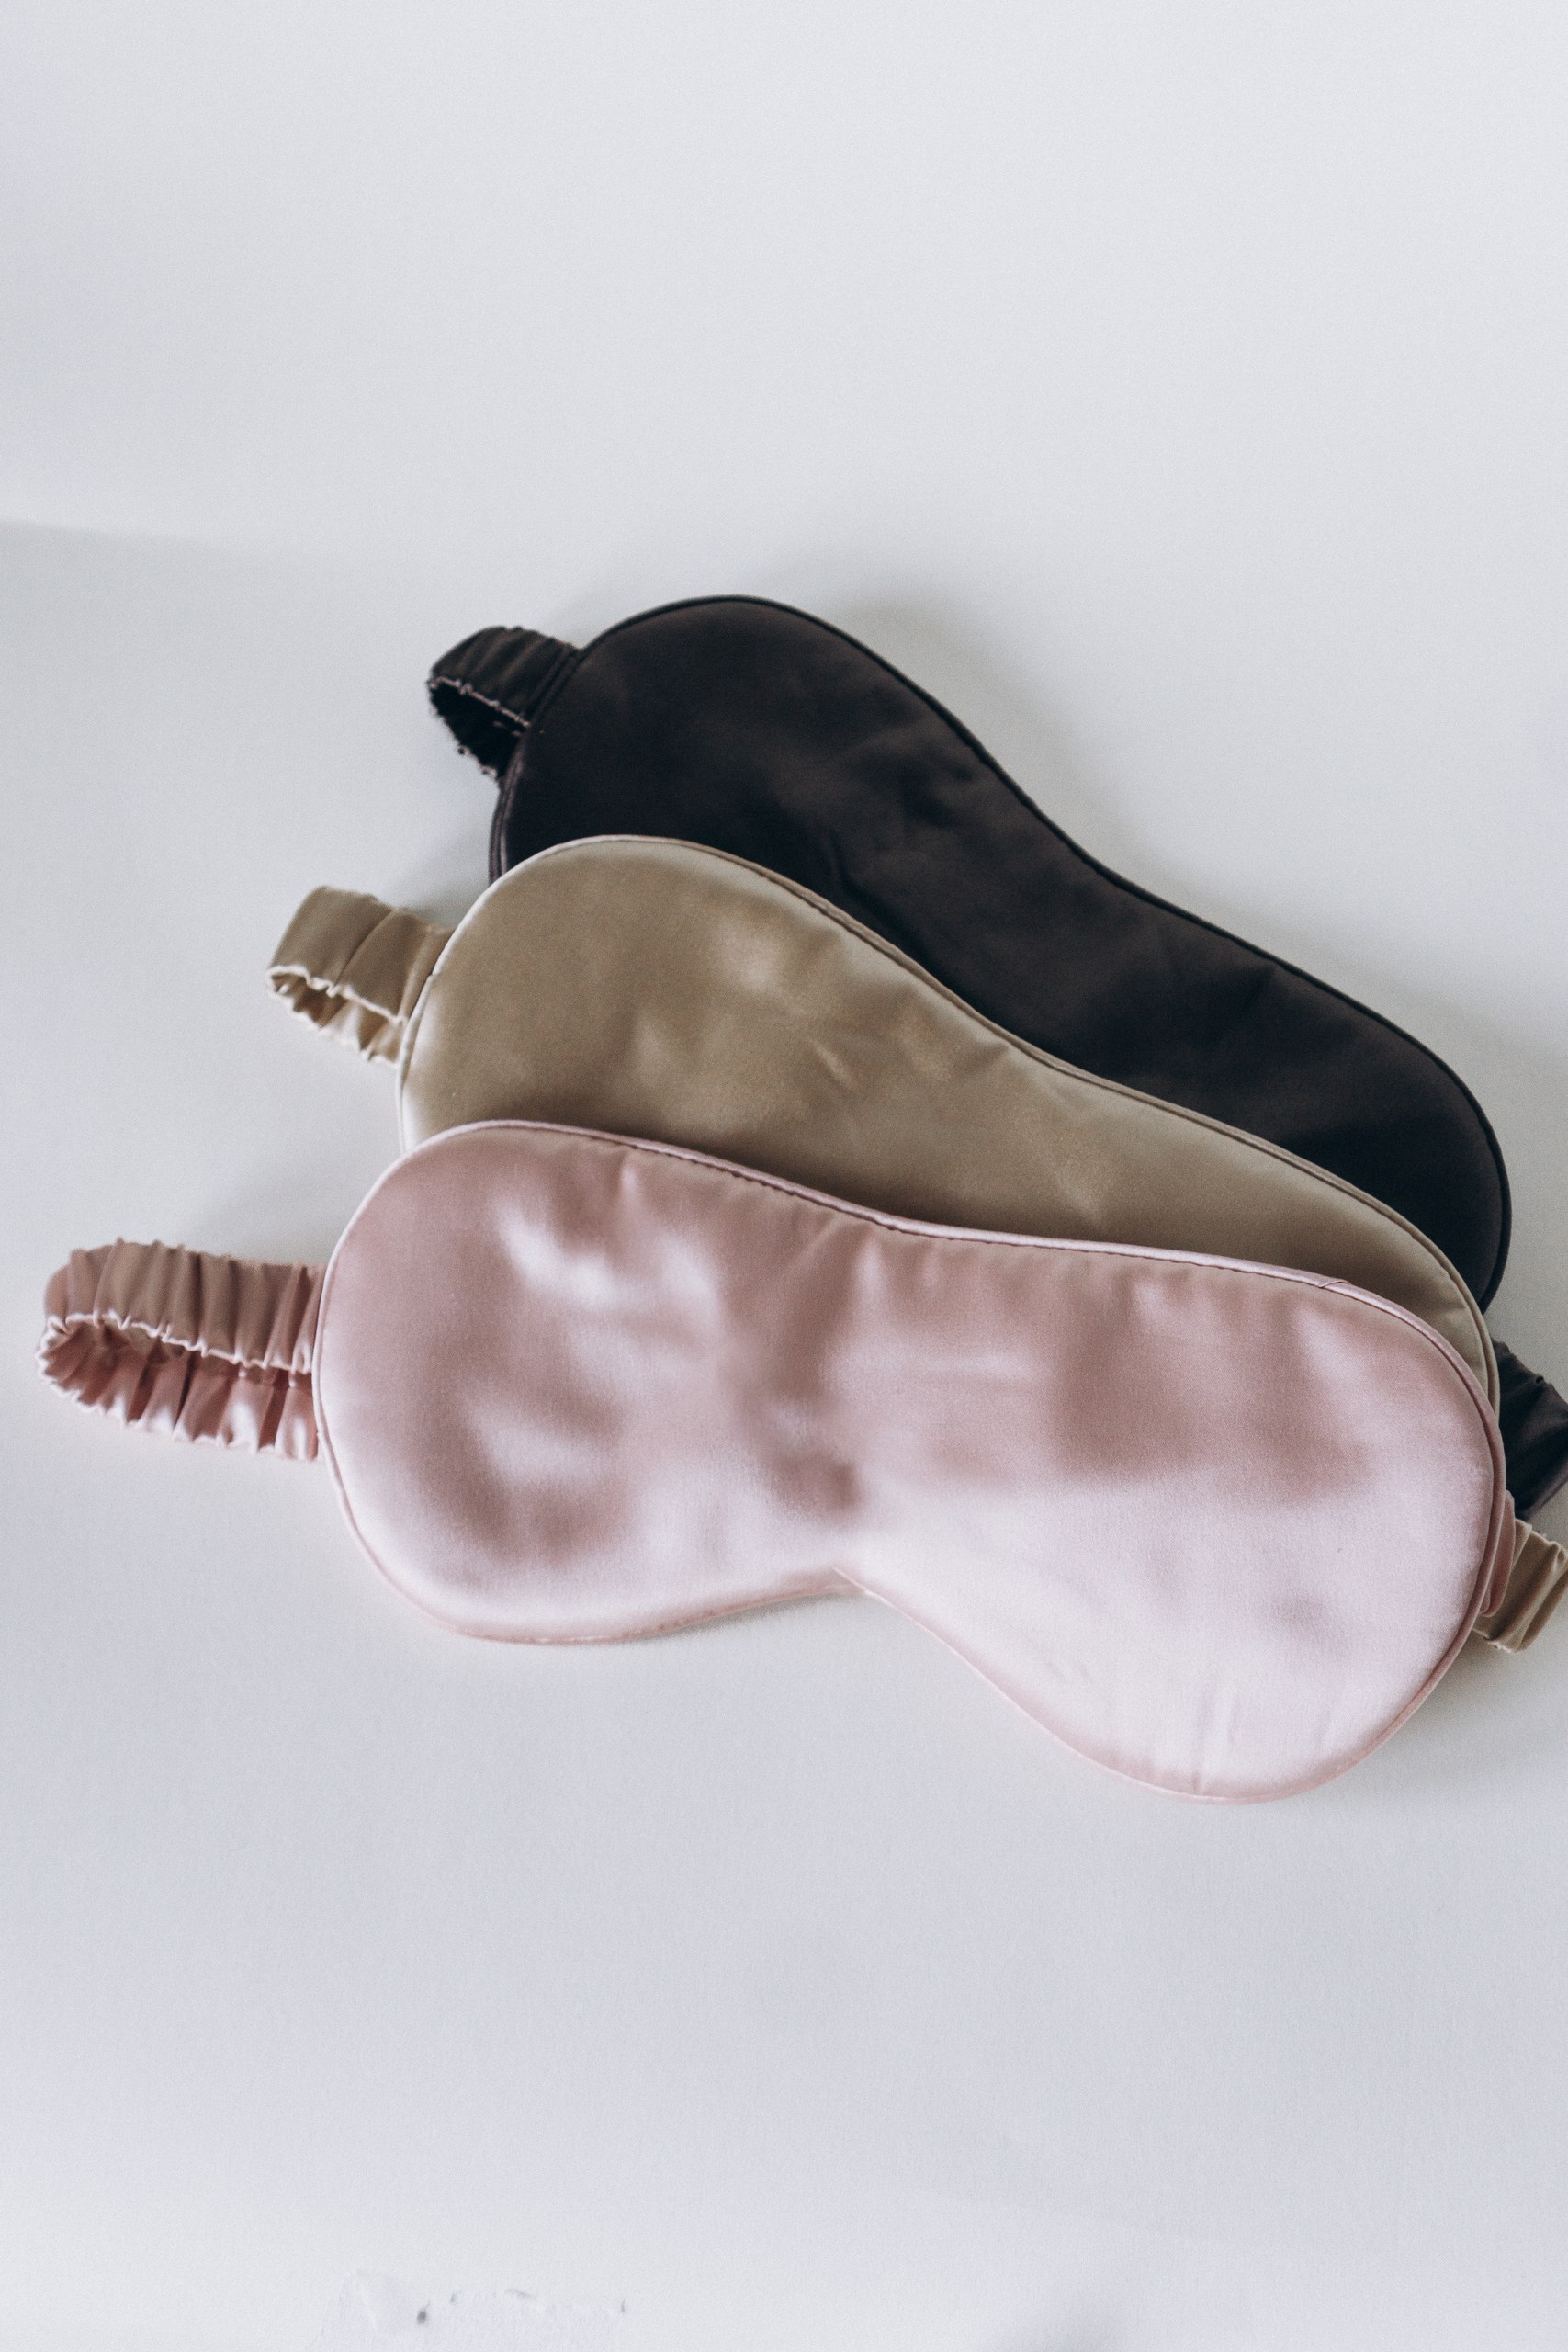 Silk eye mask - Luxurious, soft, and comfortable sleep mask made from high-quality silk fabric, providing a soothing and darkness-inducing experience for better sleep. Colors charcoal, pink, champagne